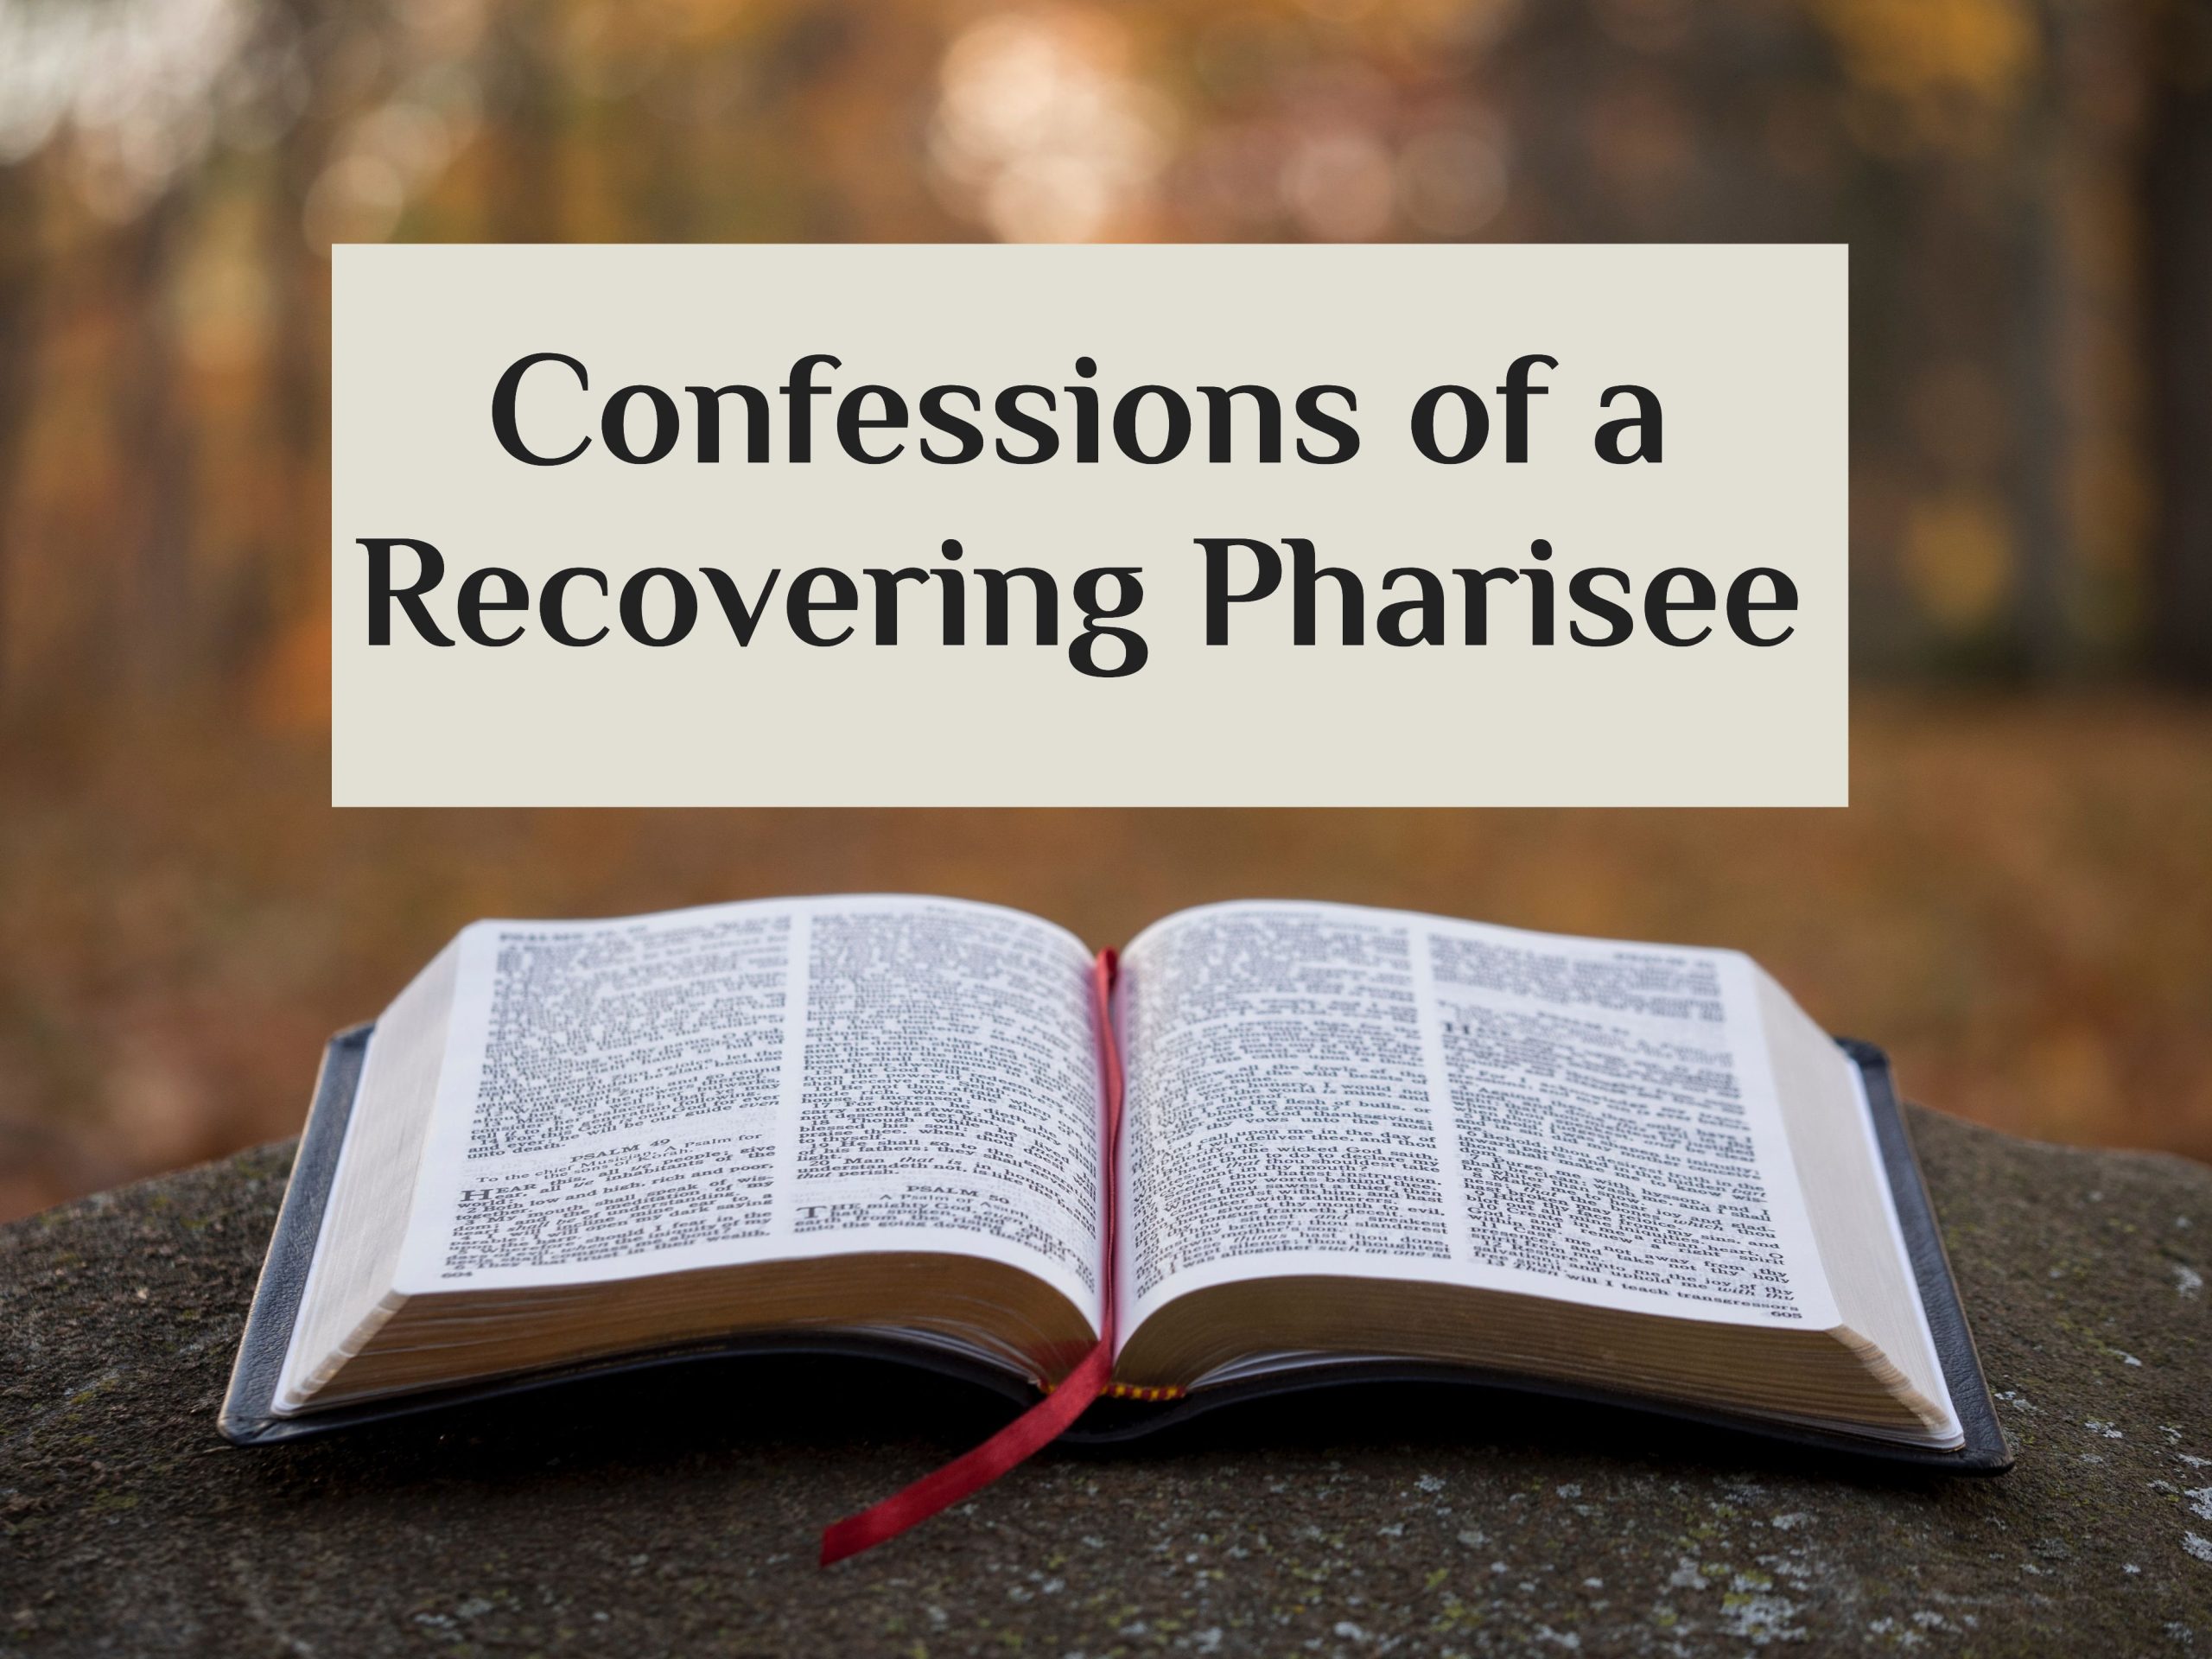 Bible - Confessions of a Recovering Pharisee